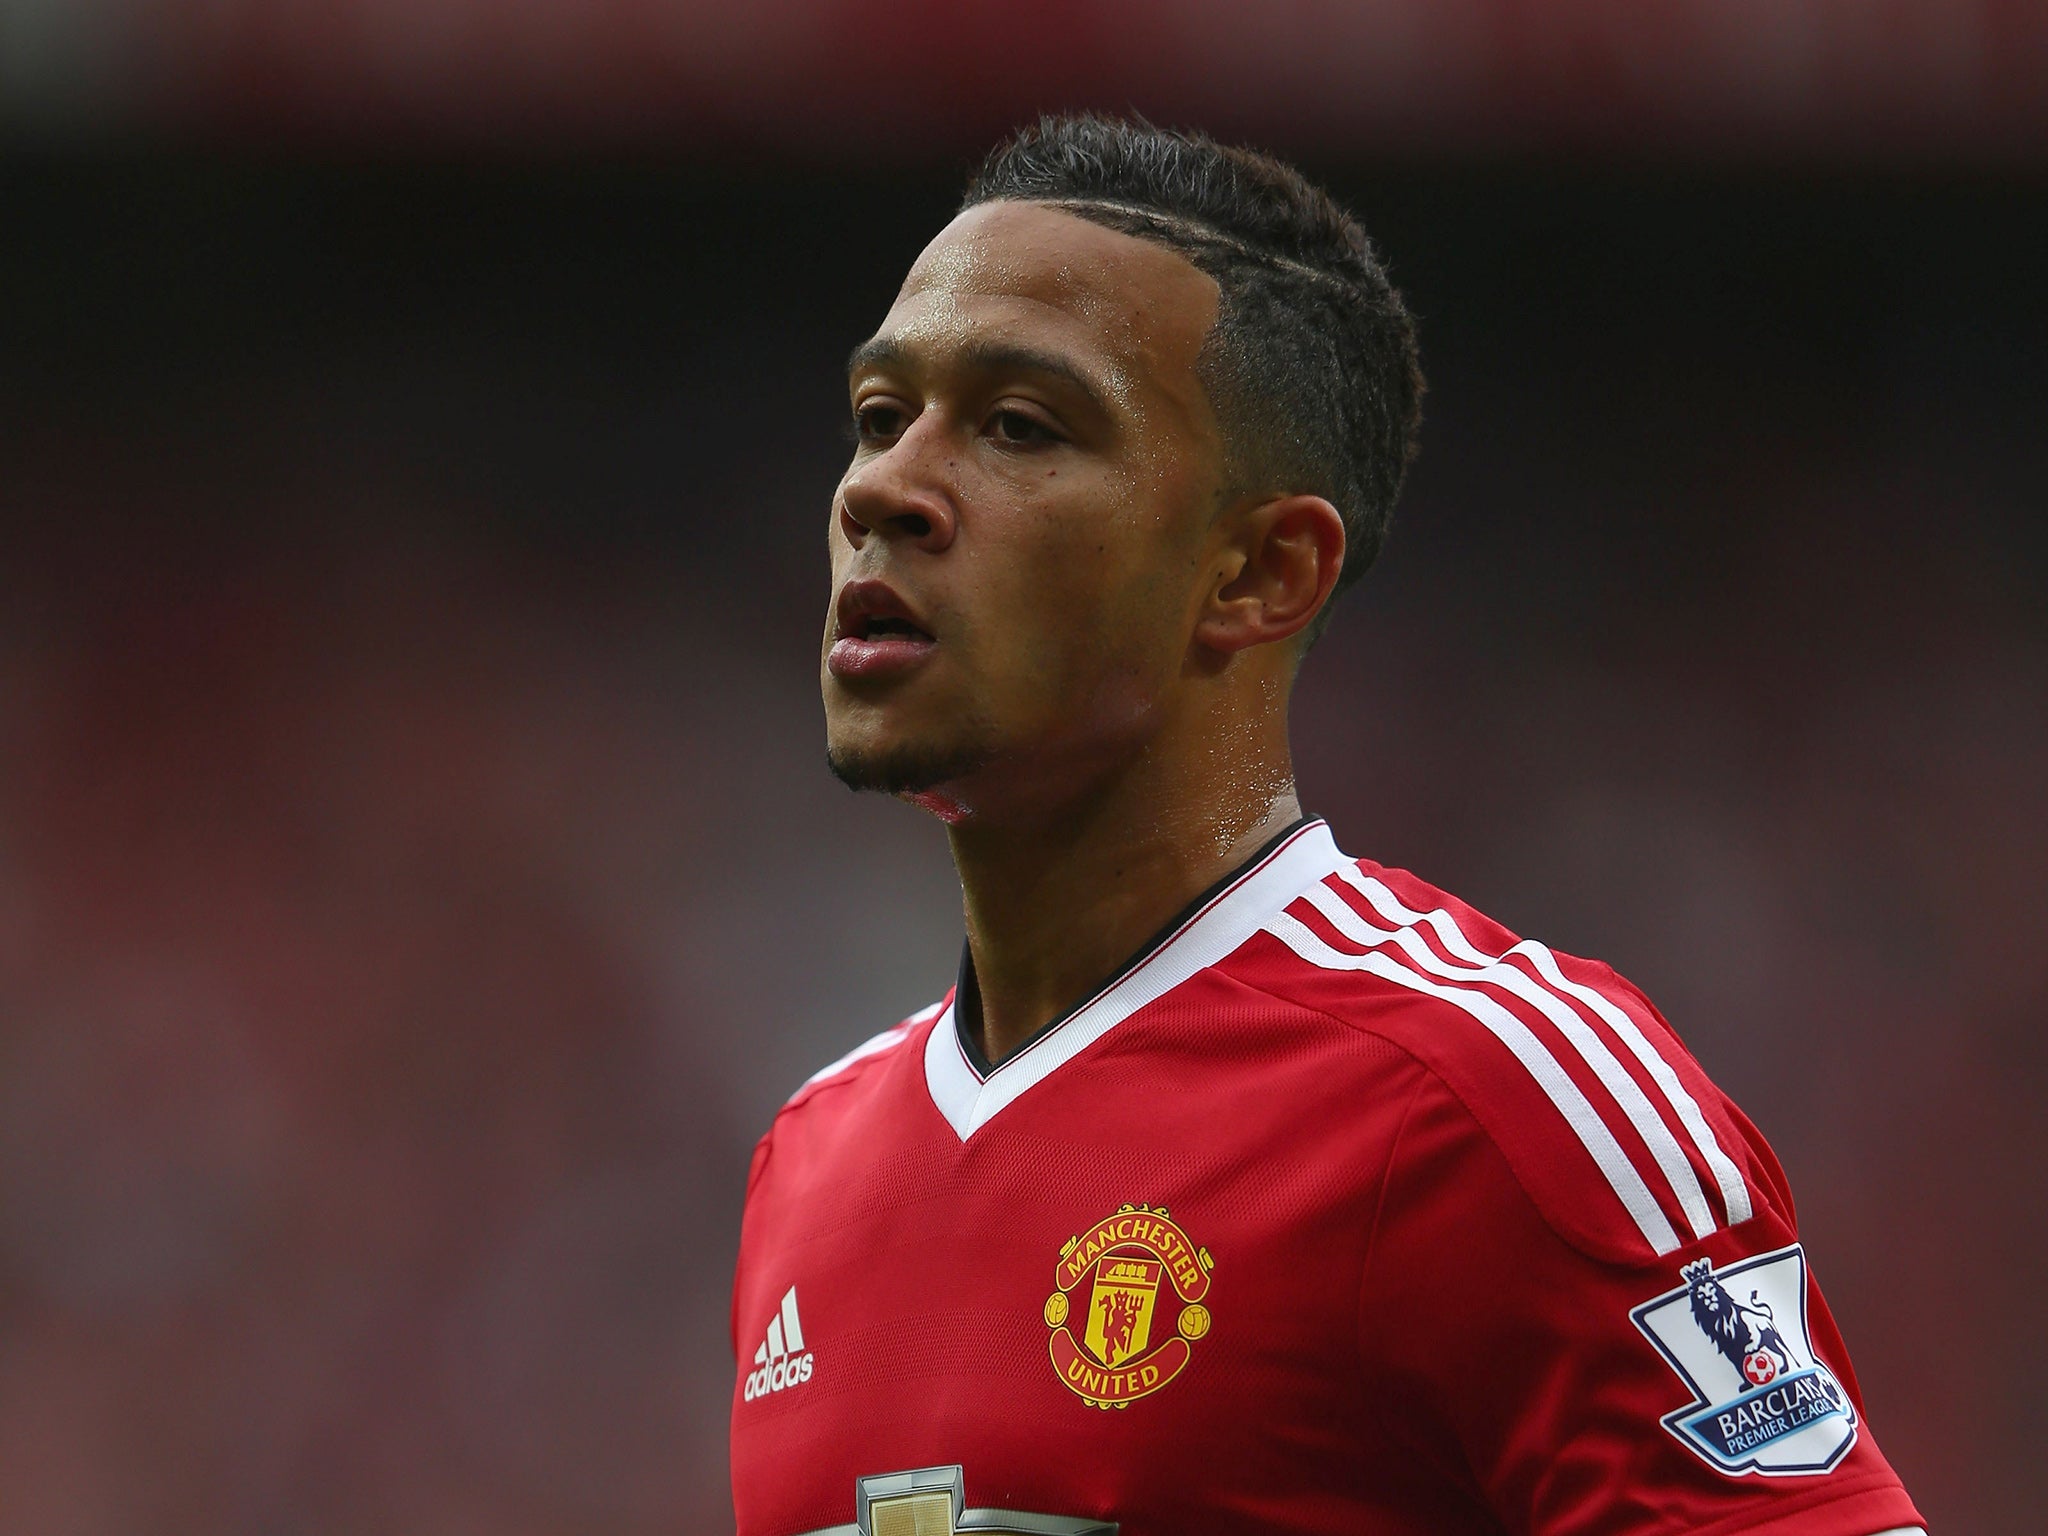 Qatar 2022: Why Memphis Depay doesn't want to use his last name on his  jersey?